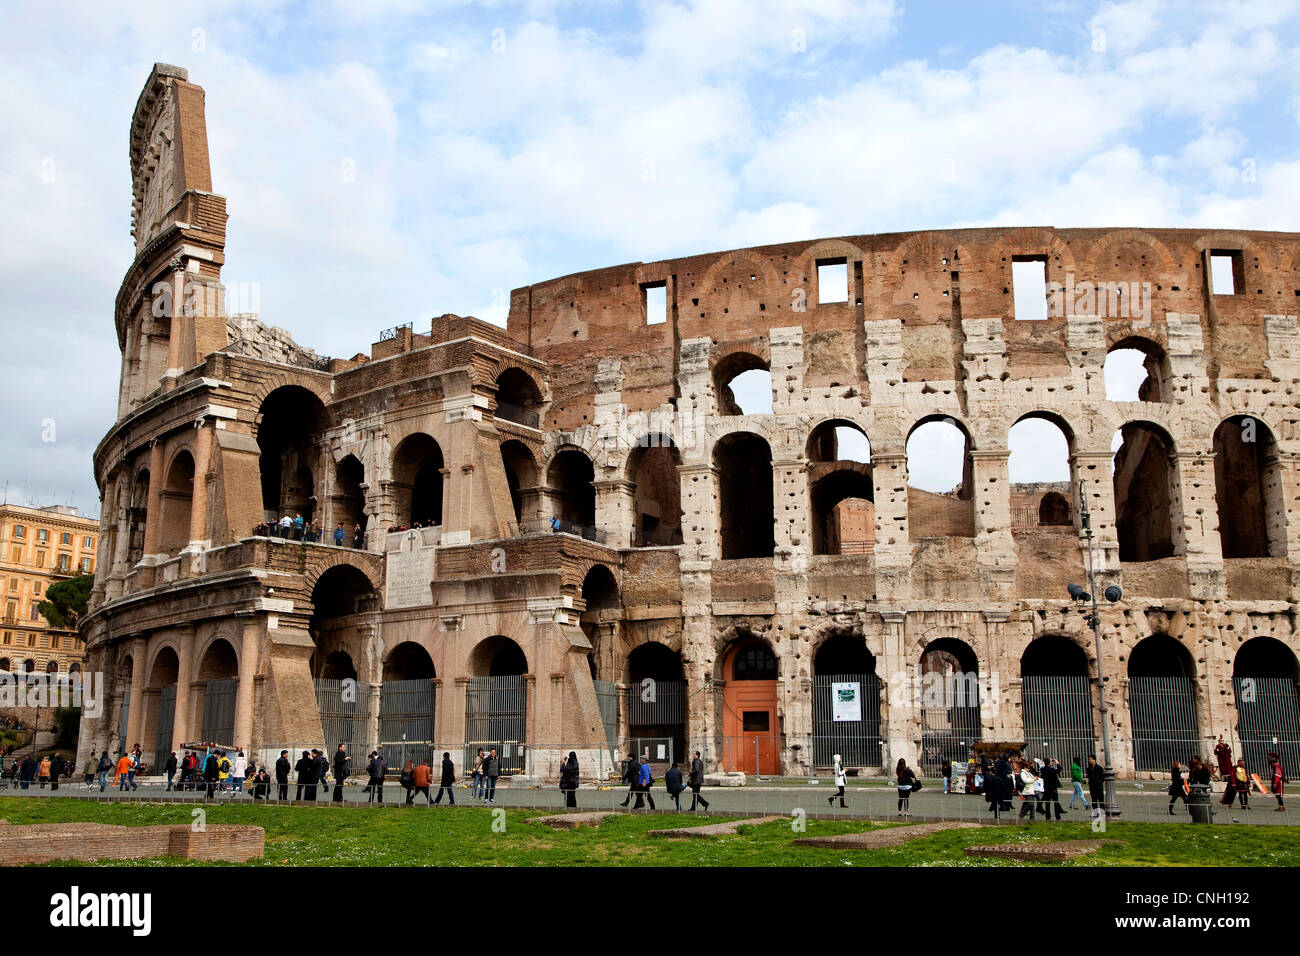 City view of Rome, Italy with old buildings, monuments, art. Roma, Italia, Europe. Colosseum, Colosseo, Coliseum Stock Photo